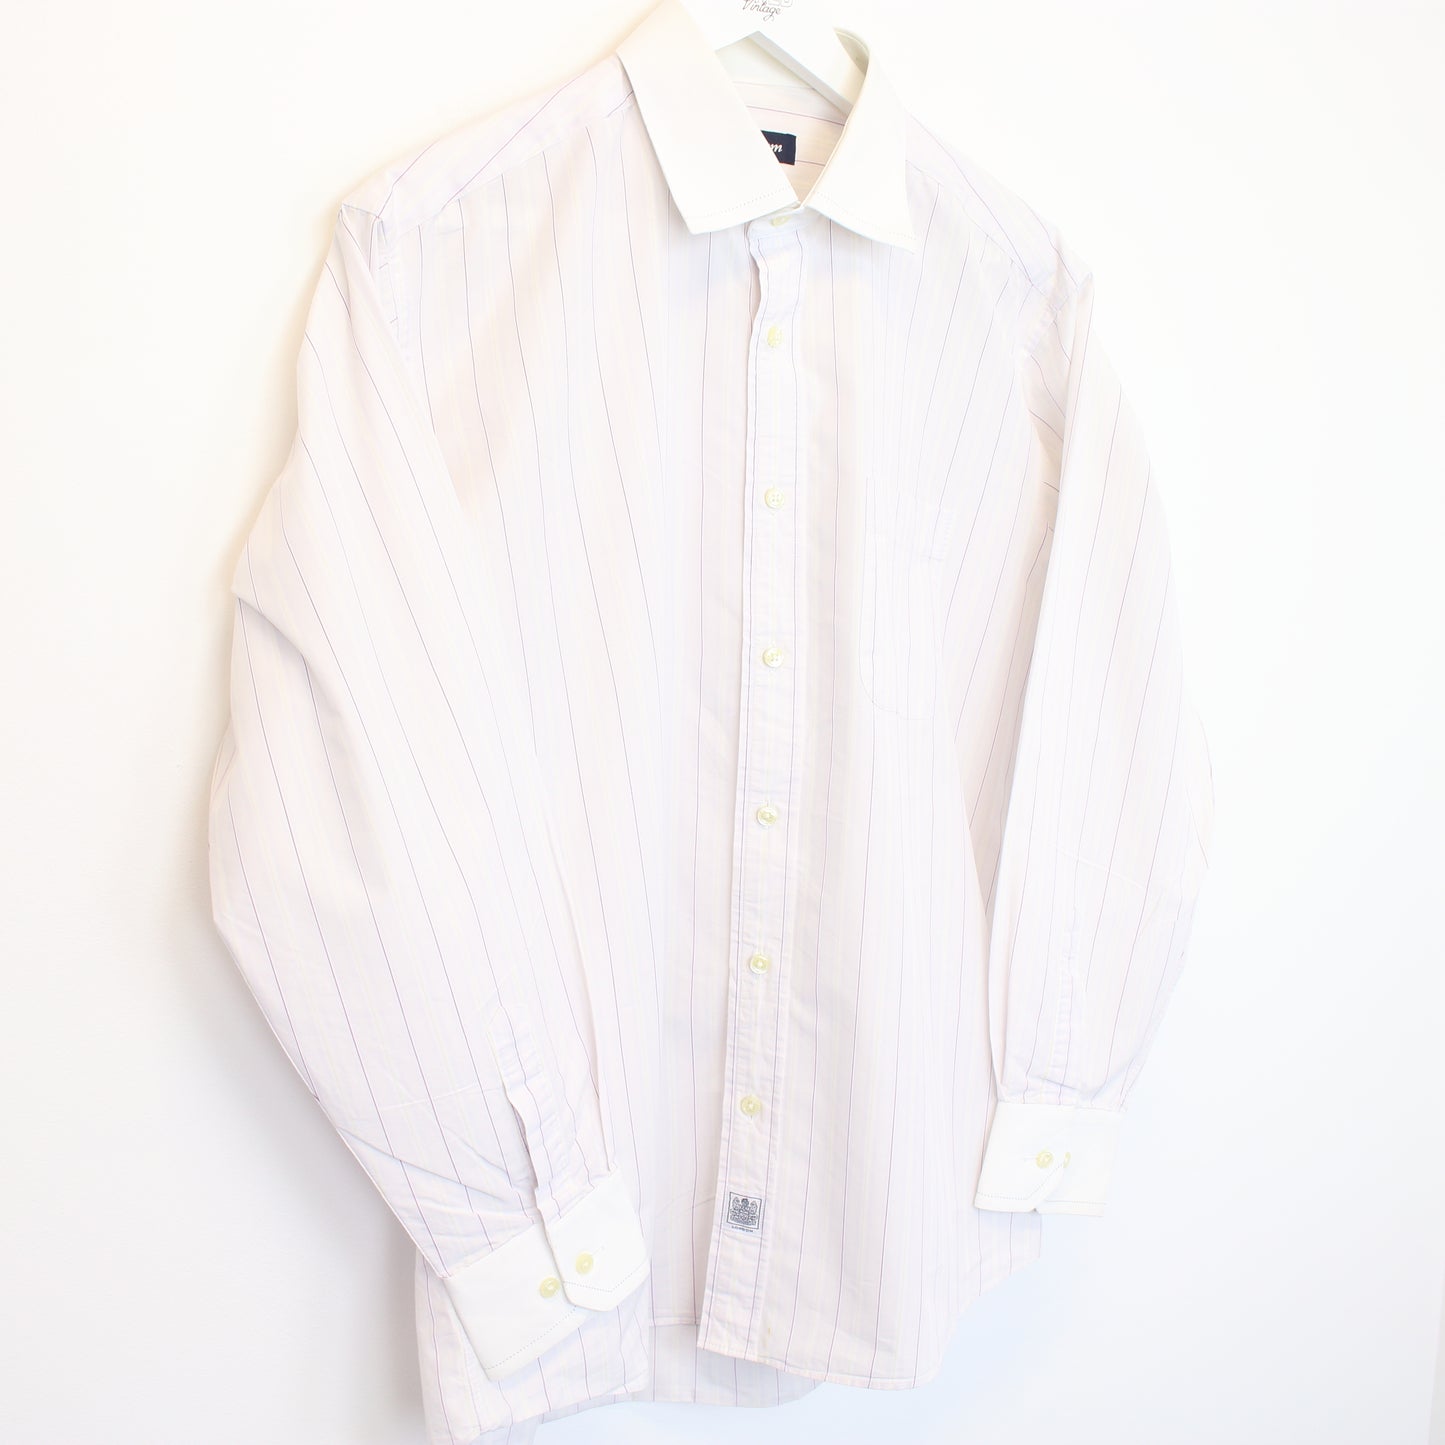 Vintage Aquascutum striped shirt in white and purple. Best fits M